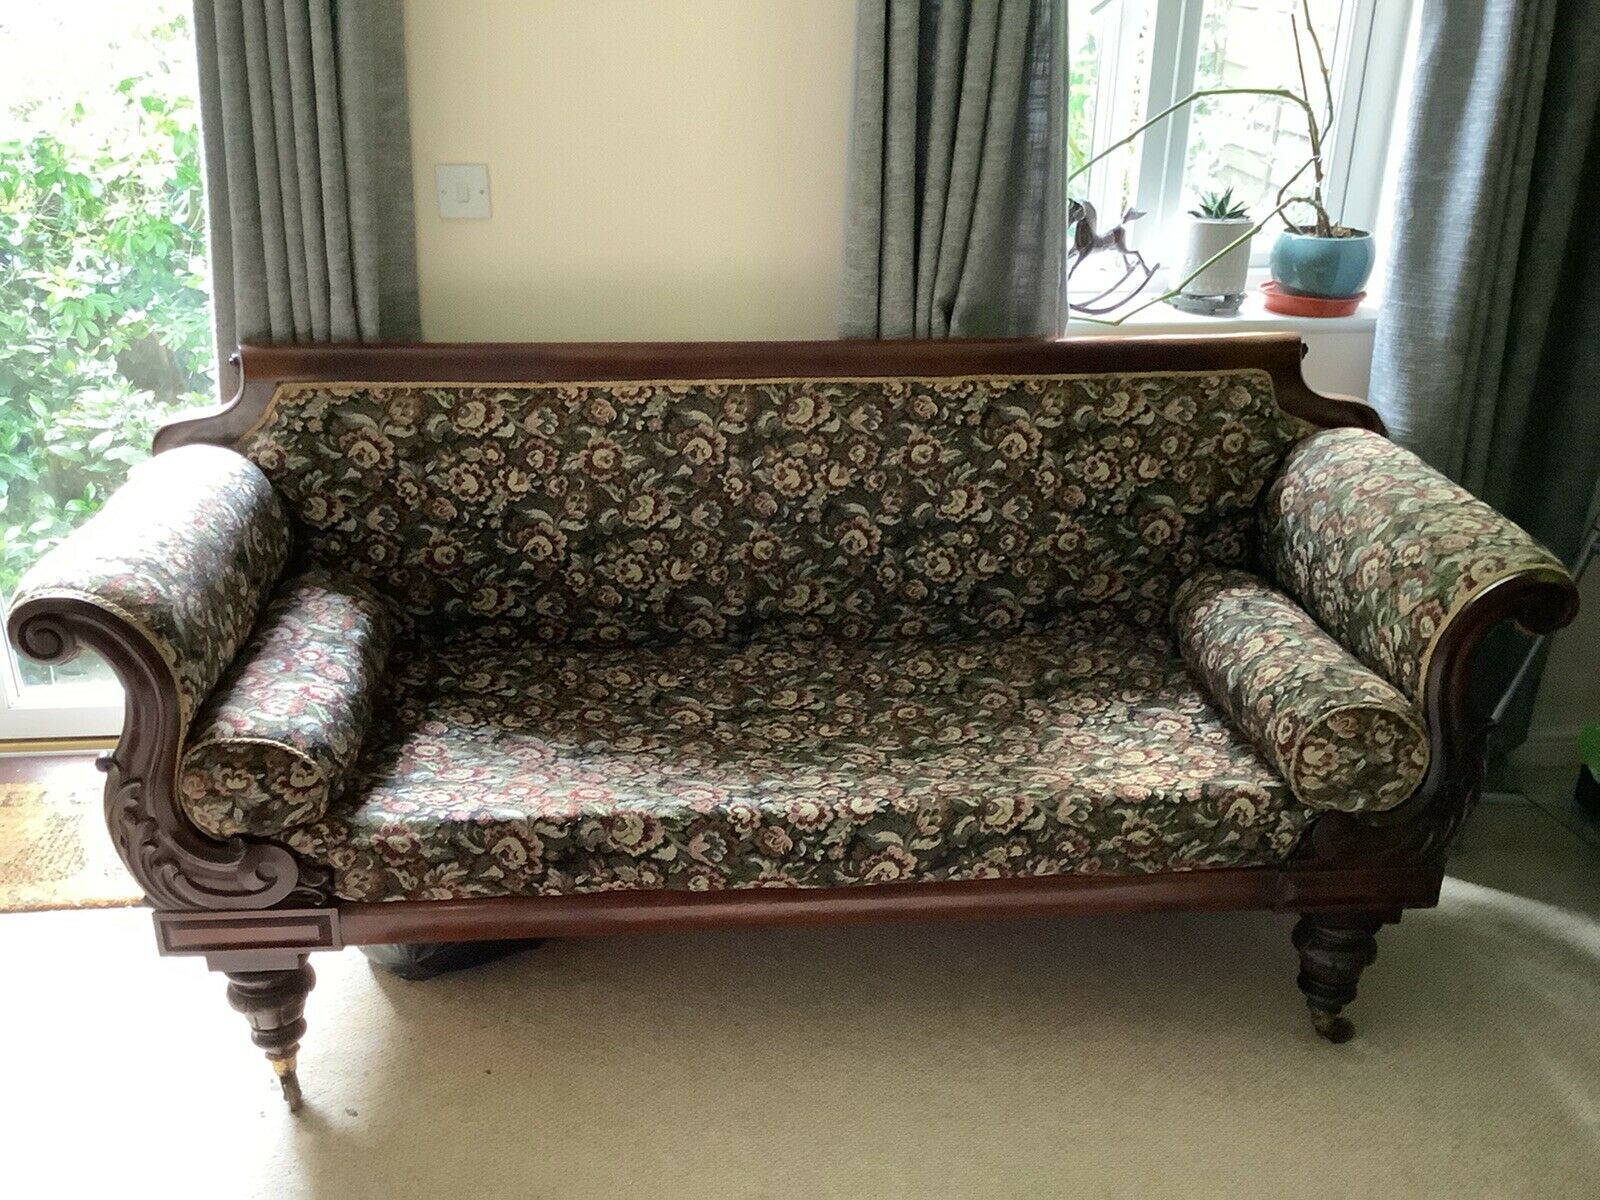 Victorian Mahogany Sofa With Tapestry Upholstery And Scrolled Arm Rests…